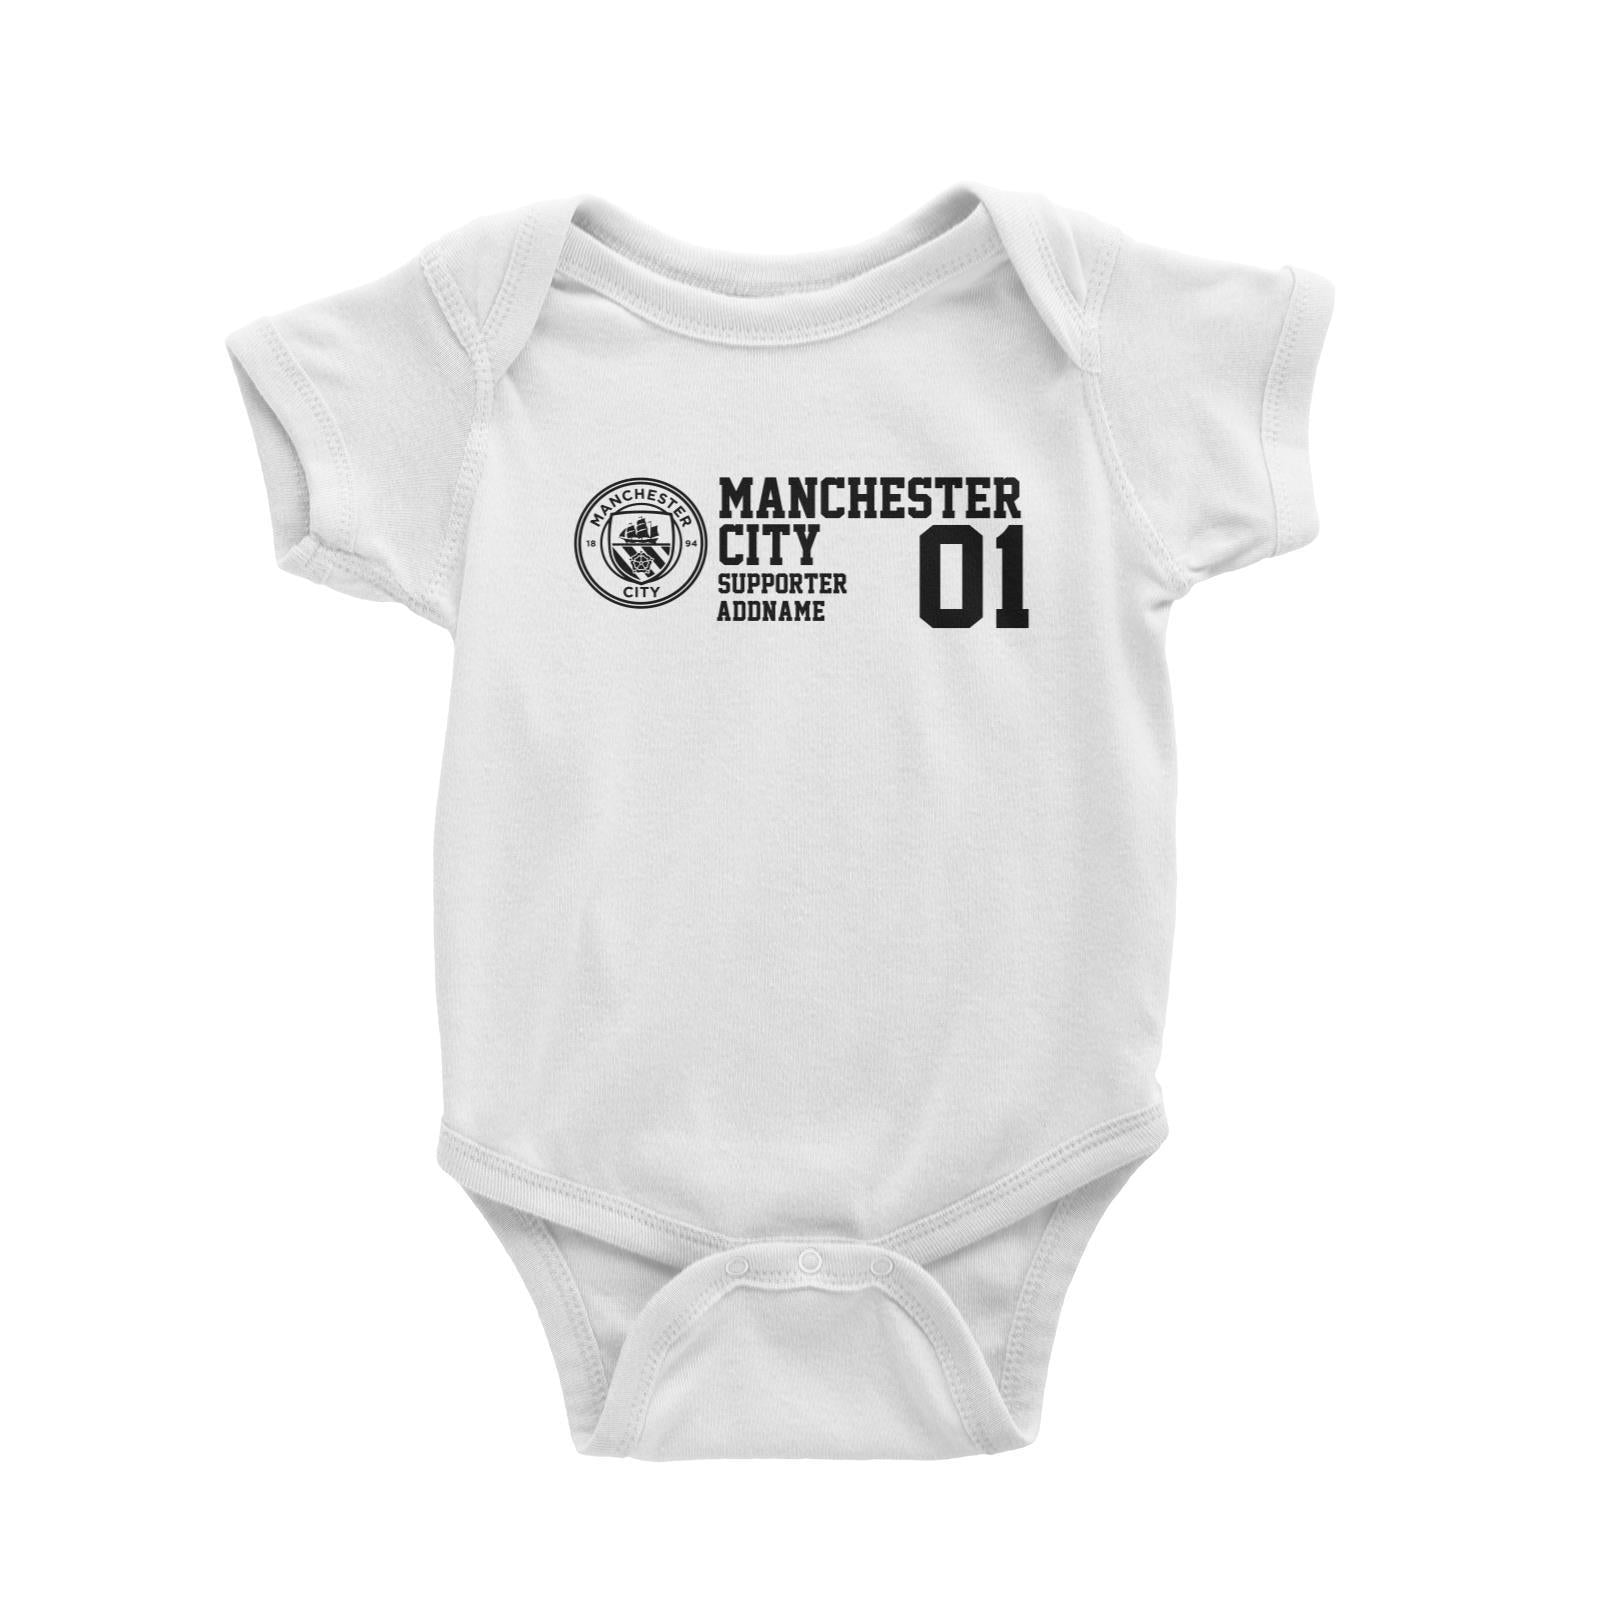 Manchester City Football Supporter Addname Baby Romper